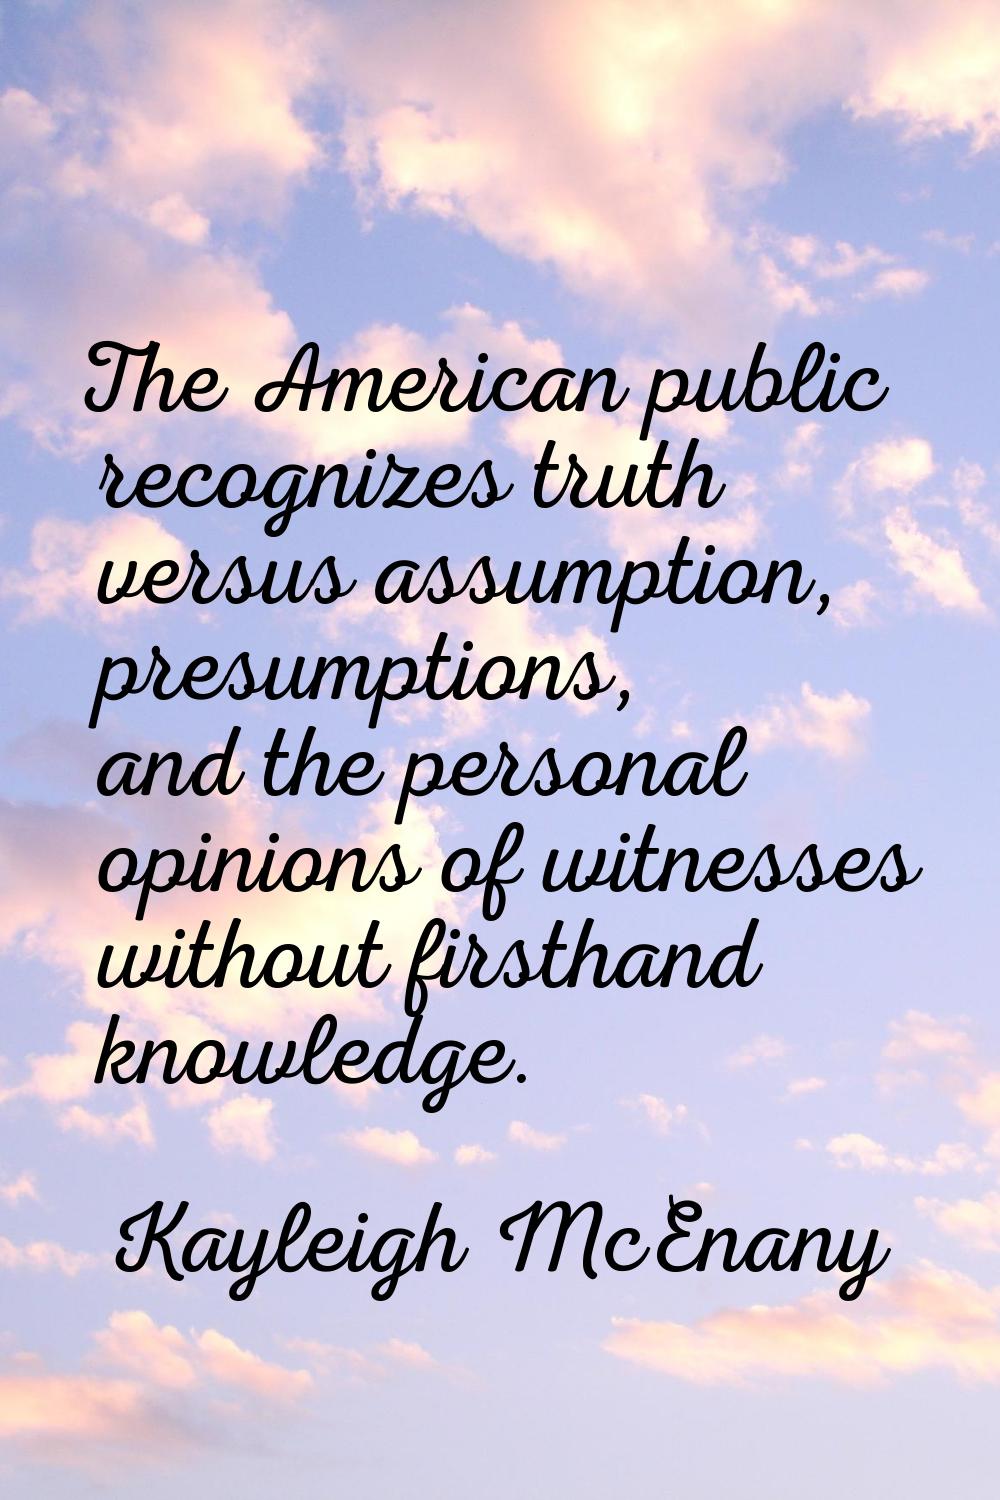 The American public recognizes truth versus assumption, presumptions, and the personal opinions of 